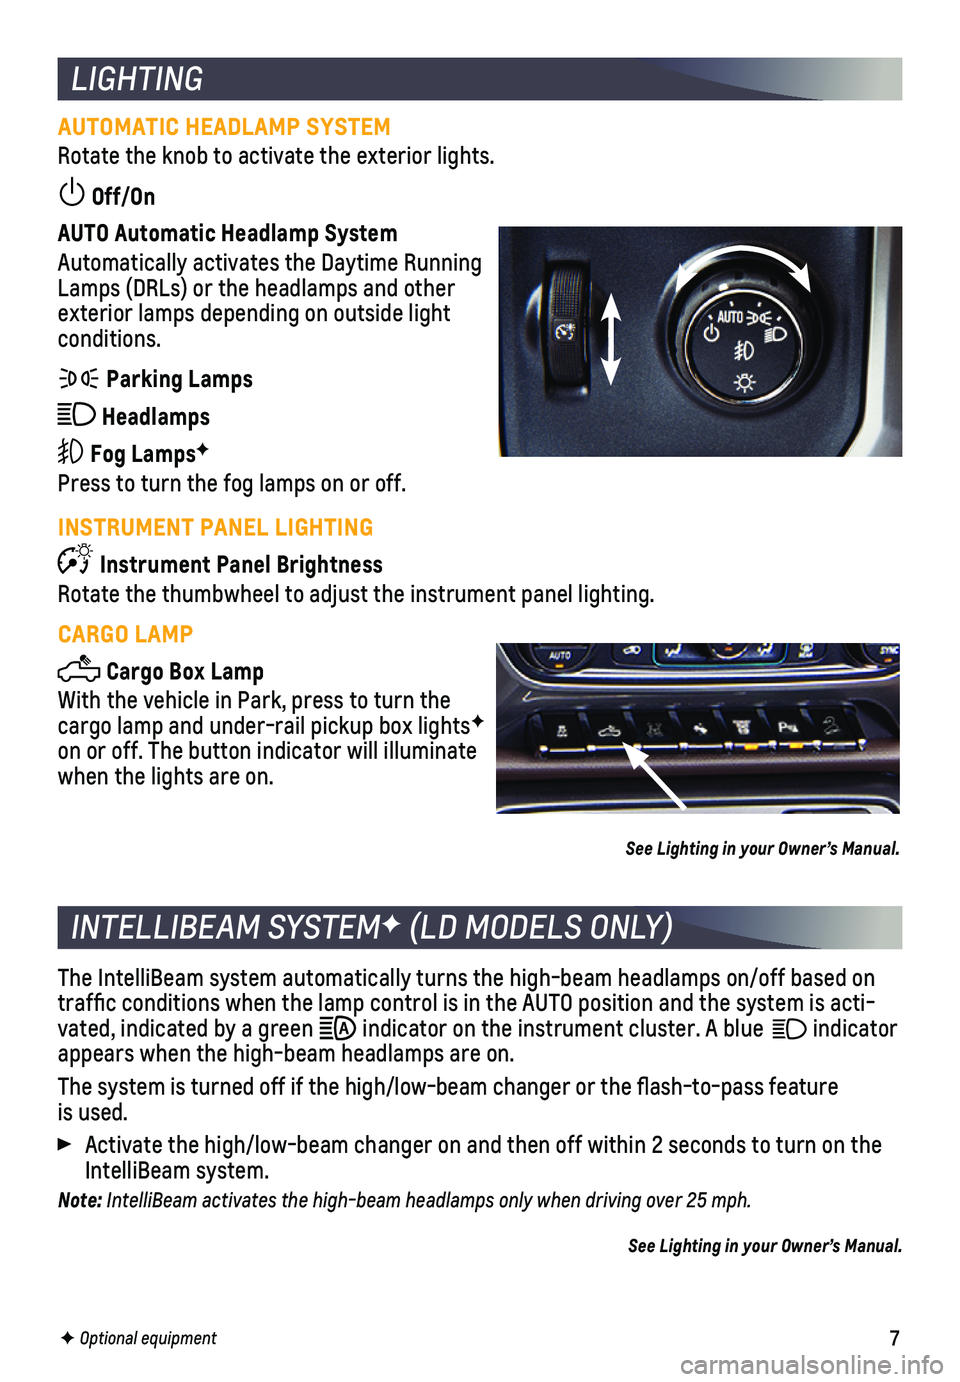 CHEVROLET SILVERADO 2018  Get To Know Guide 7
AUTOMATIC HEADLAMP SYSTEM
Rotate the knob to activate the  exterior lights.
 Off/On 
AUTO Automatic Headlamp System
Automatically activates the Daytime Running Lamps (DRLs) or the headlamps and oth